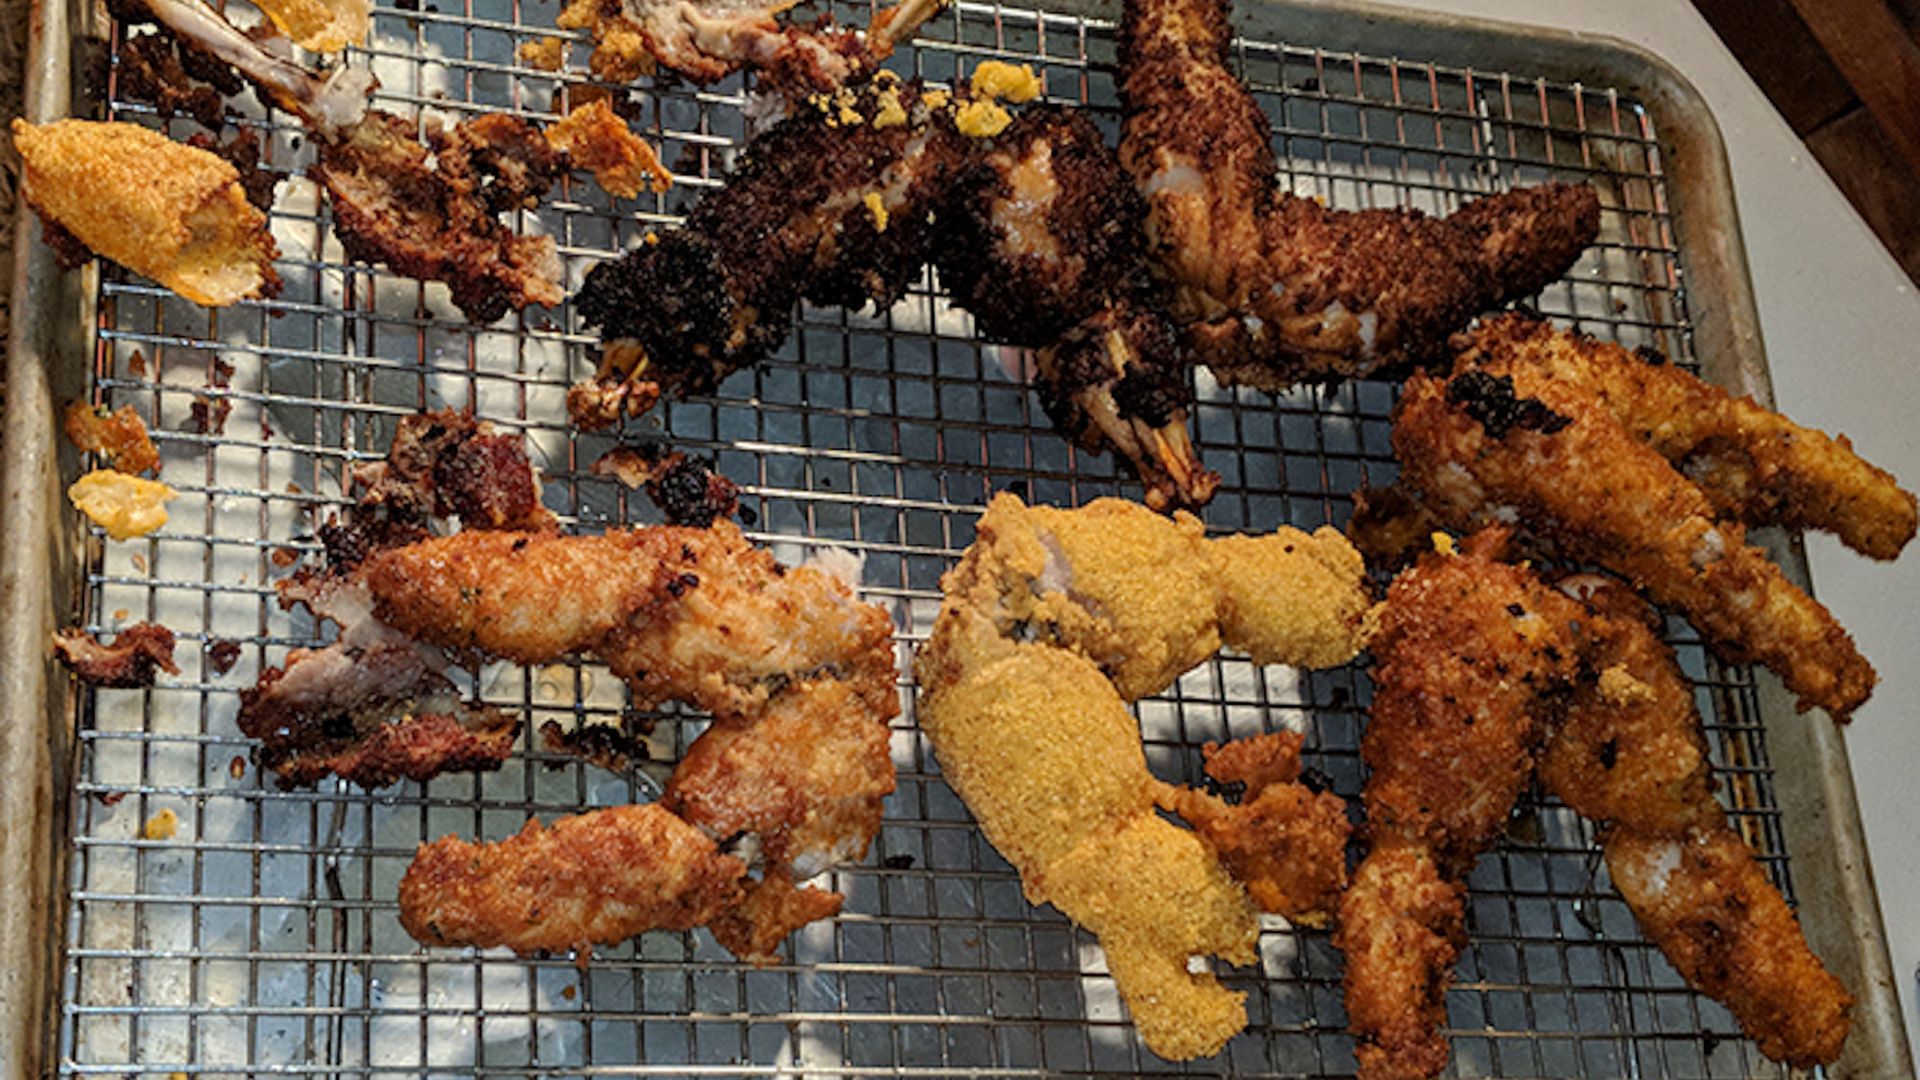 Fried frog legs on a grate.